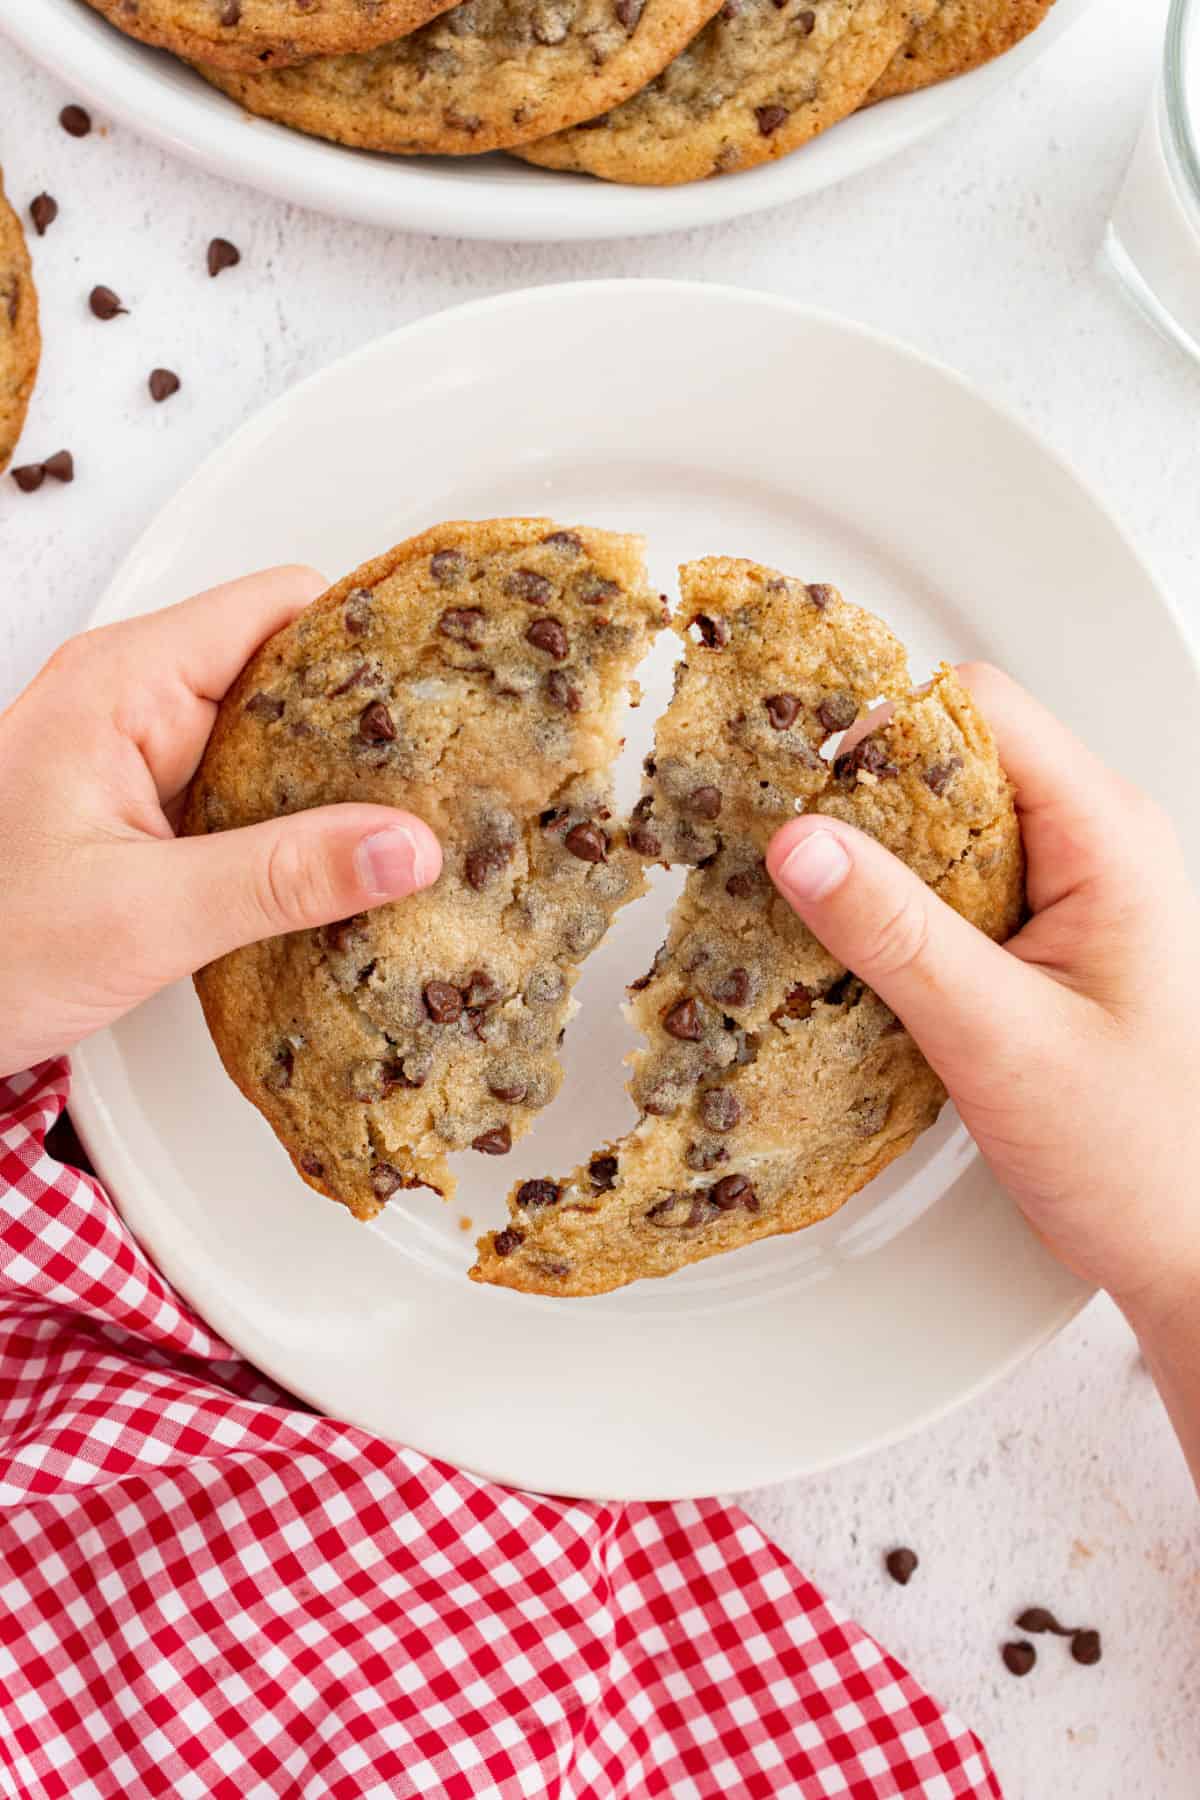 Chocolate chip cookie with cheesecake filling being broken in half.